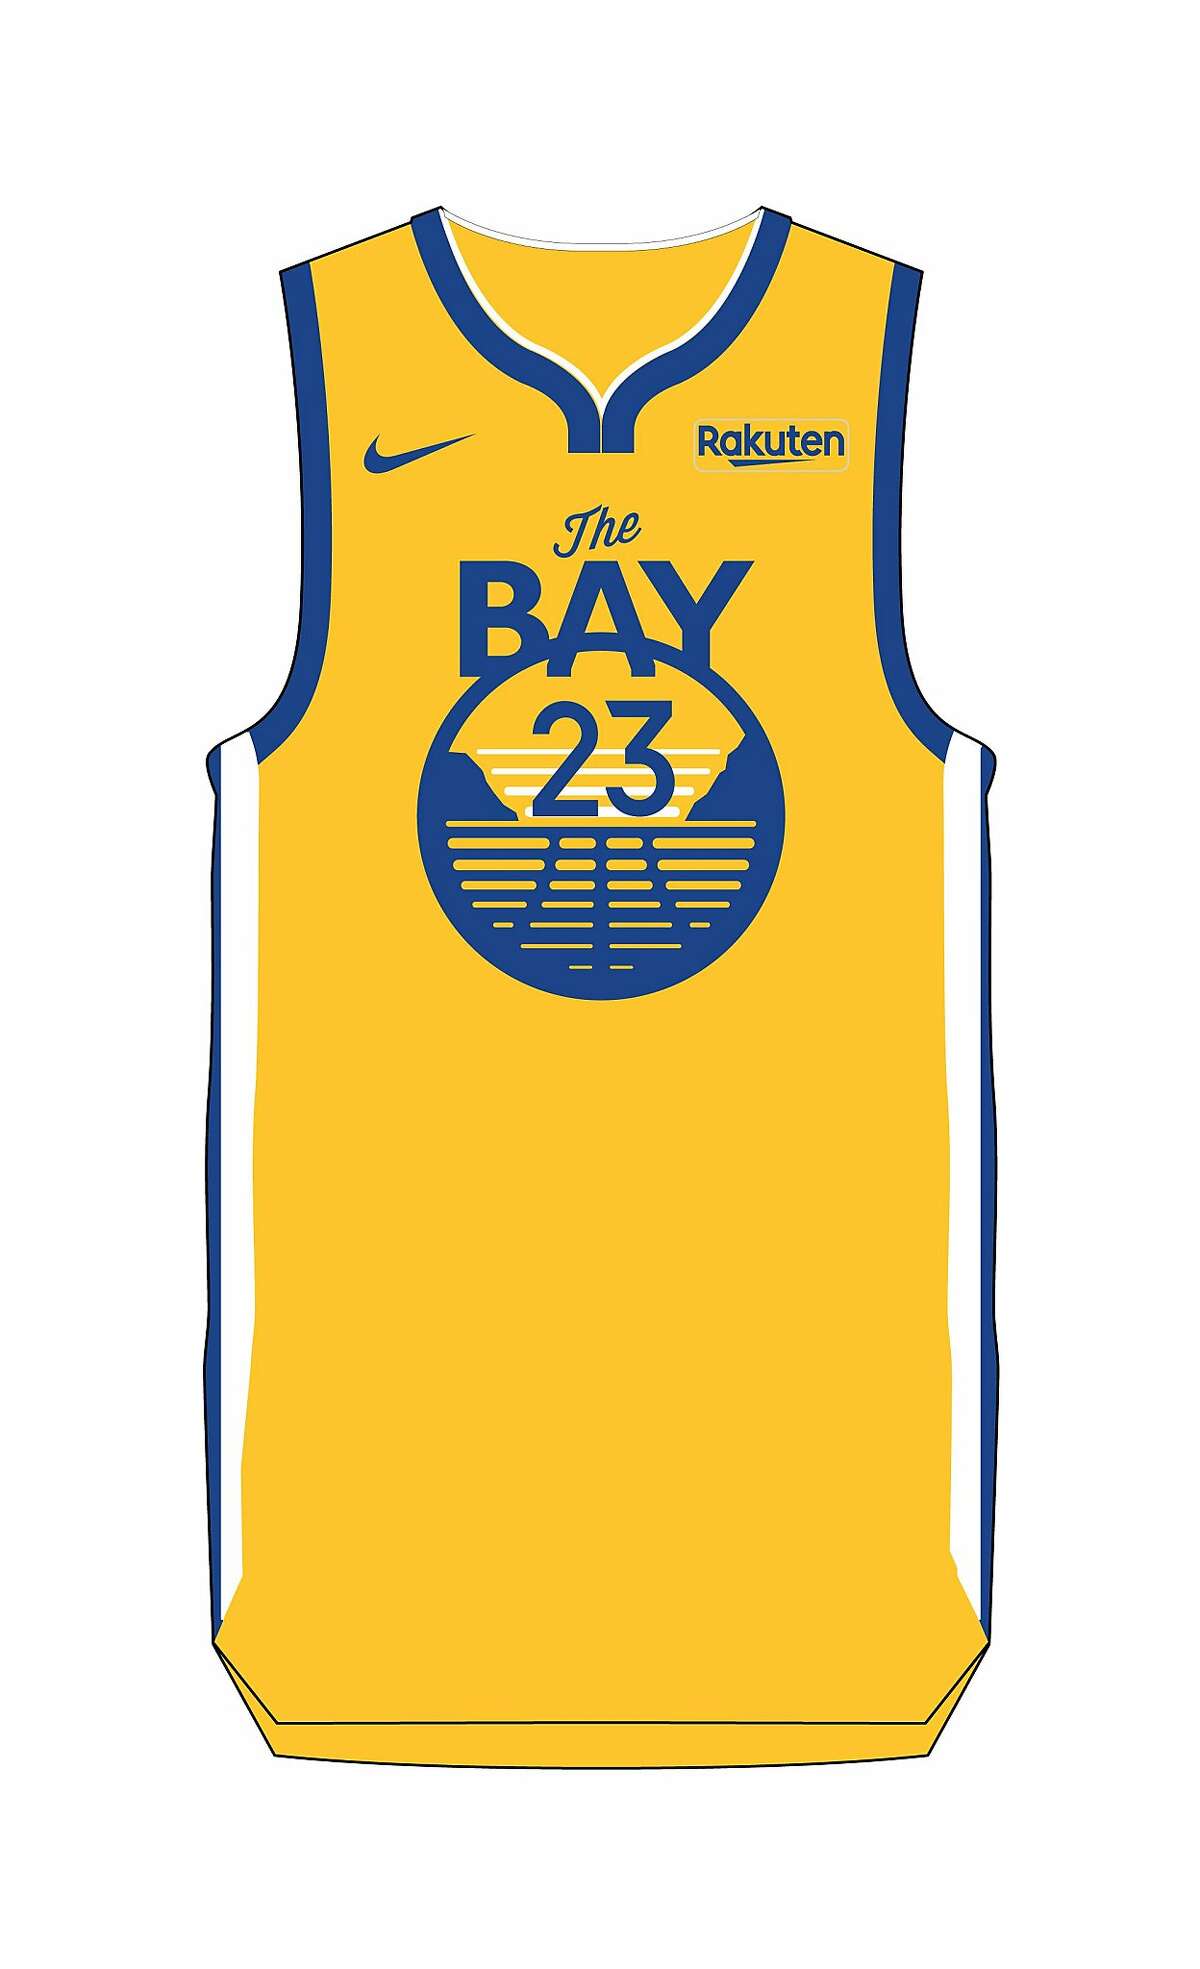 Warriors to wear 'San Francisco' across the chest; see their 2019